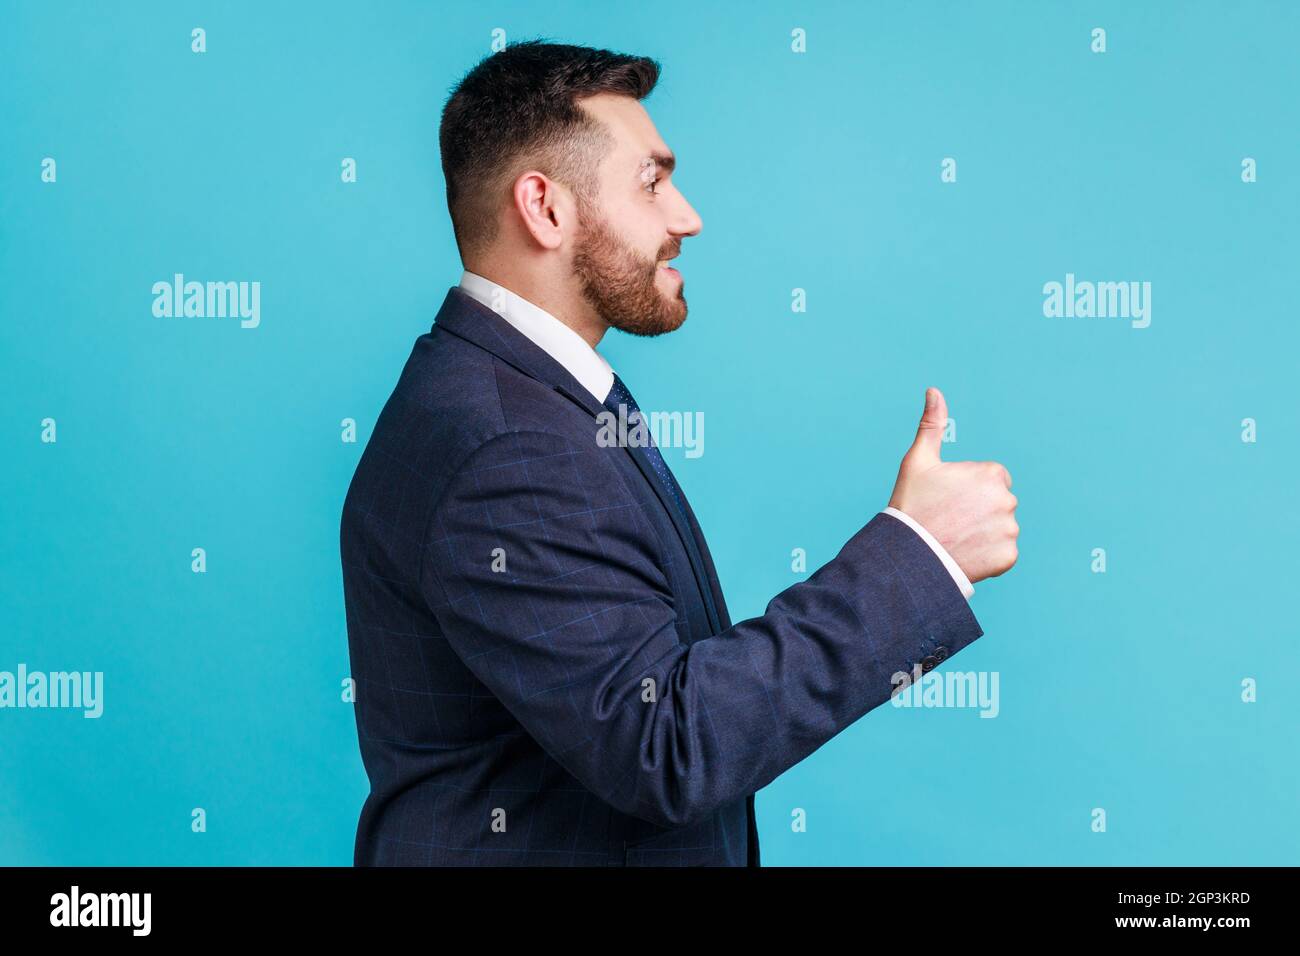 https://c8.alamy.com/comp/2GP3KRD/well-done-good-job!-profile-portrait-of-smiling-happy-bearded-man-wearing-dark-official-style-suit-looking-ahead-showing-thumb-up-indoor-studio-shot-isolated-on-blue-background-2GP3KRD.jpg